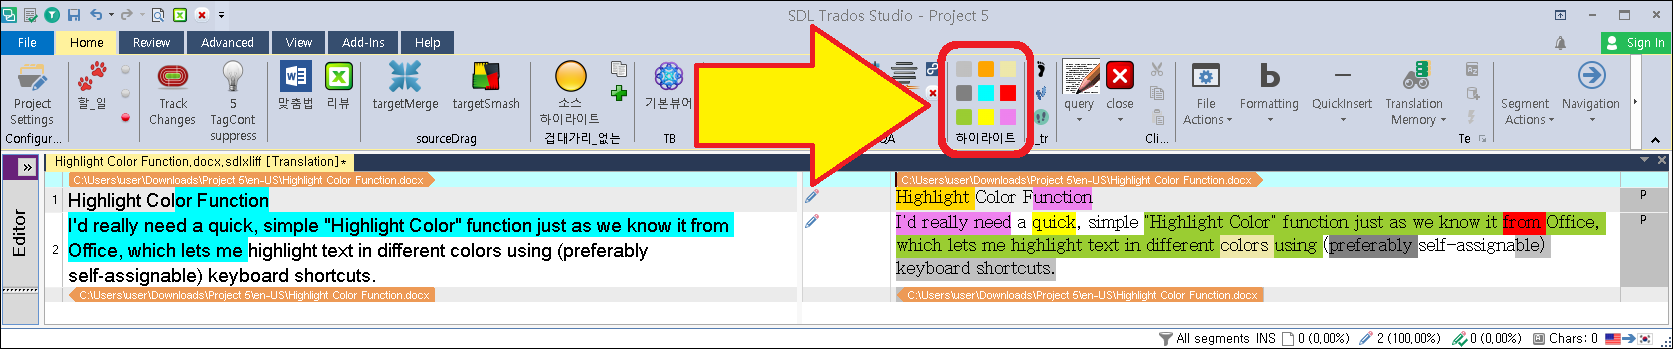 Screenshot of Trados Studio Ideas with an arrow pointing to a 'Highlight Color Function' feature request in the user interface, showing text highlighting options.